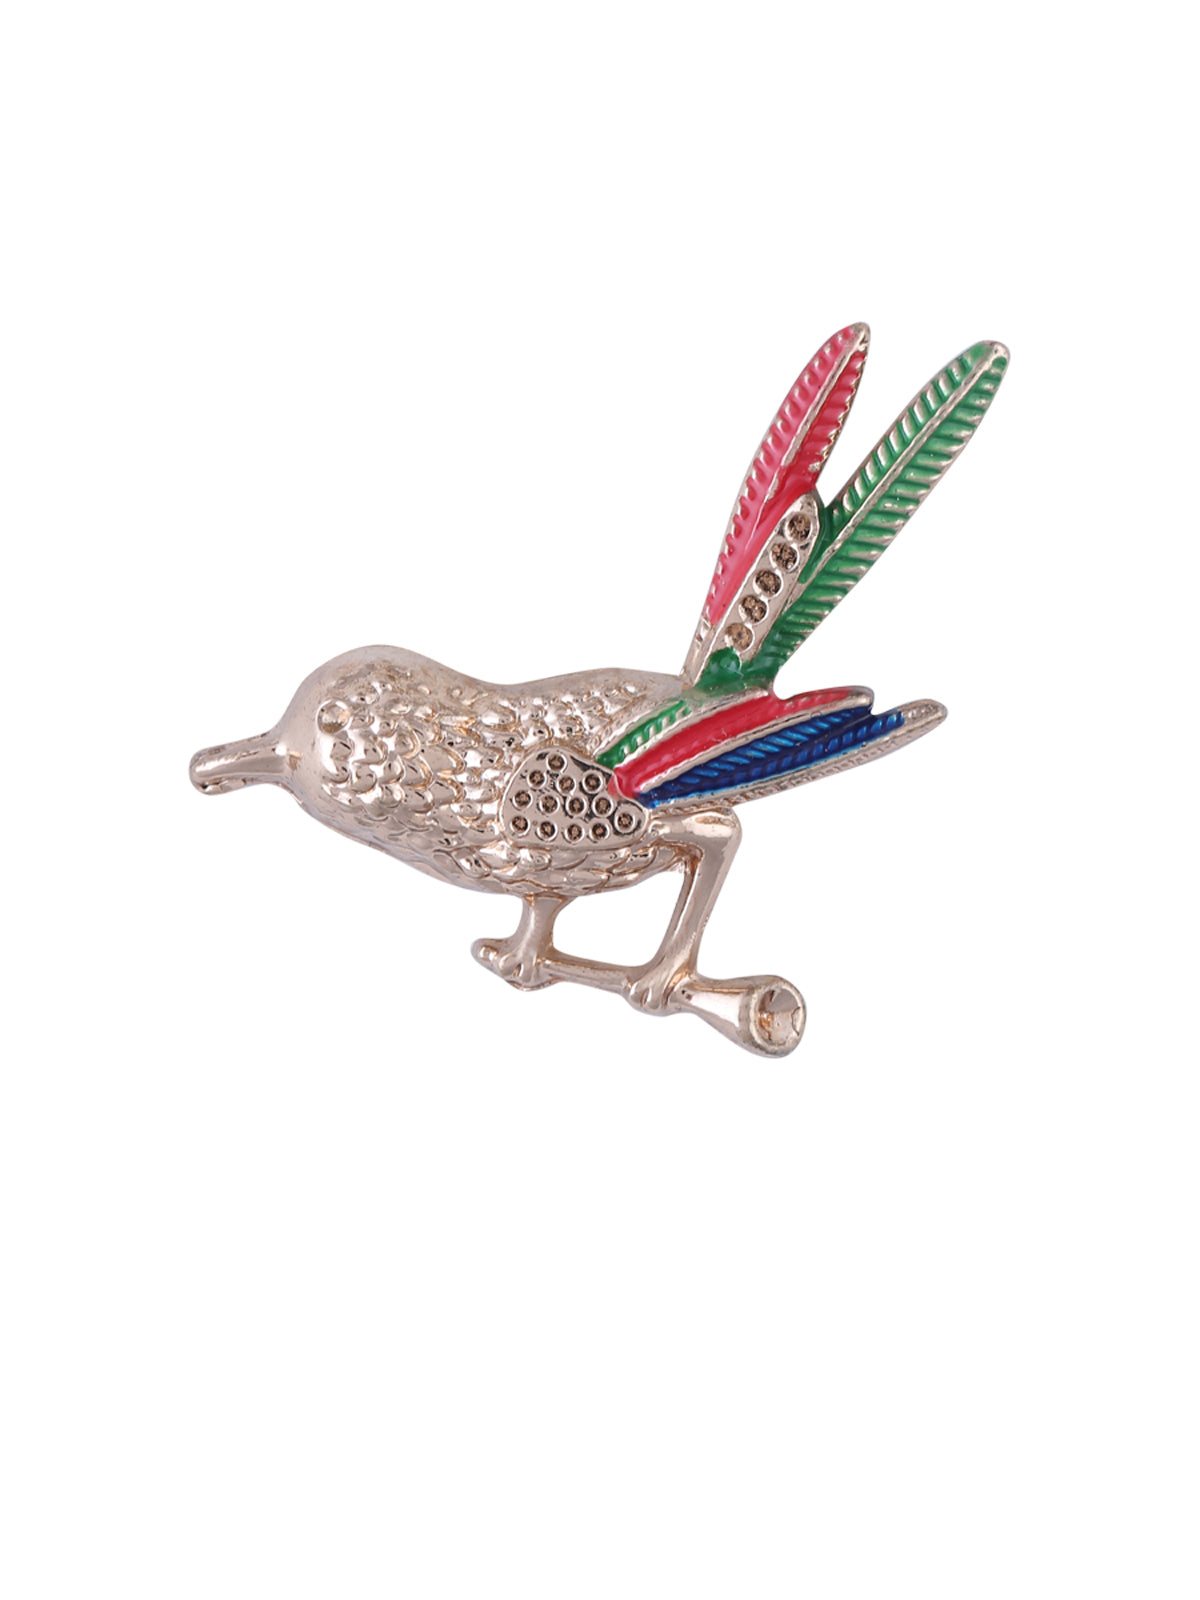 Tri-Colored Sparrow Inspired Pin Fastening Unisex Collar Brooch